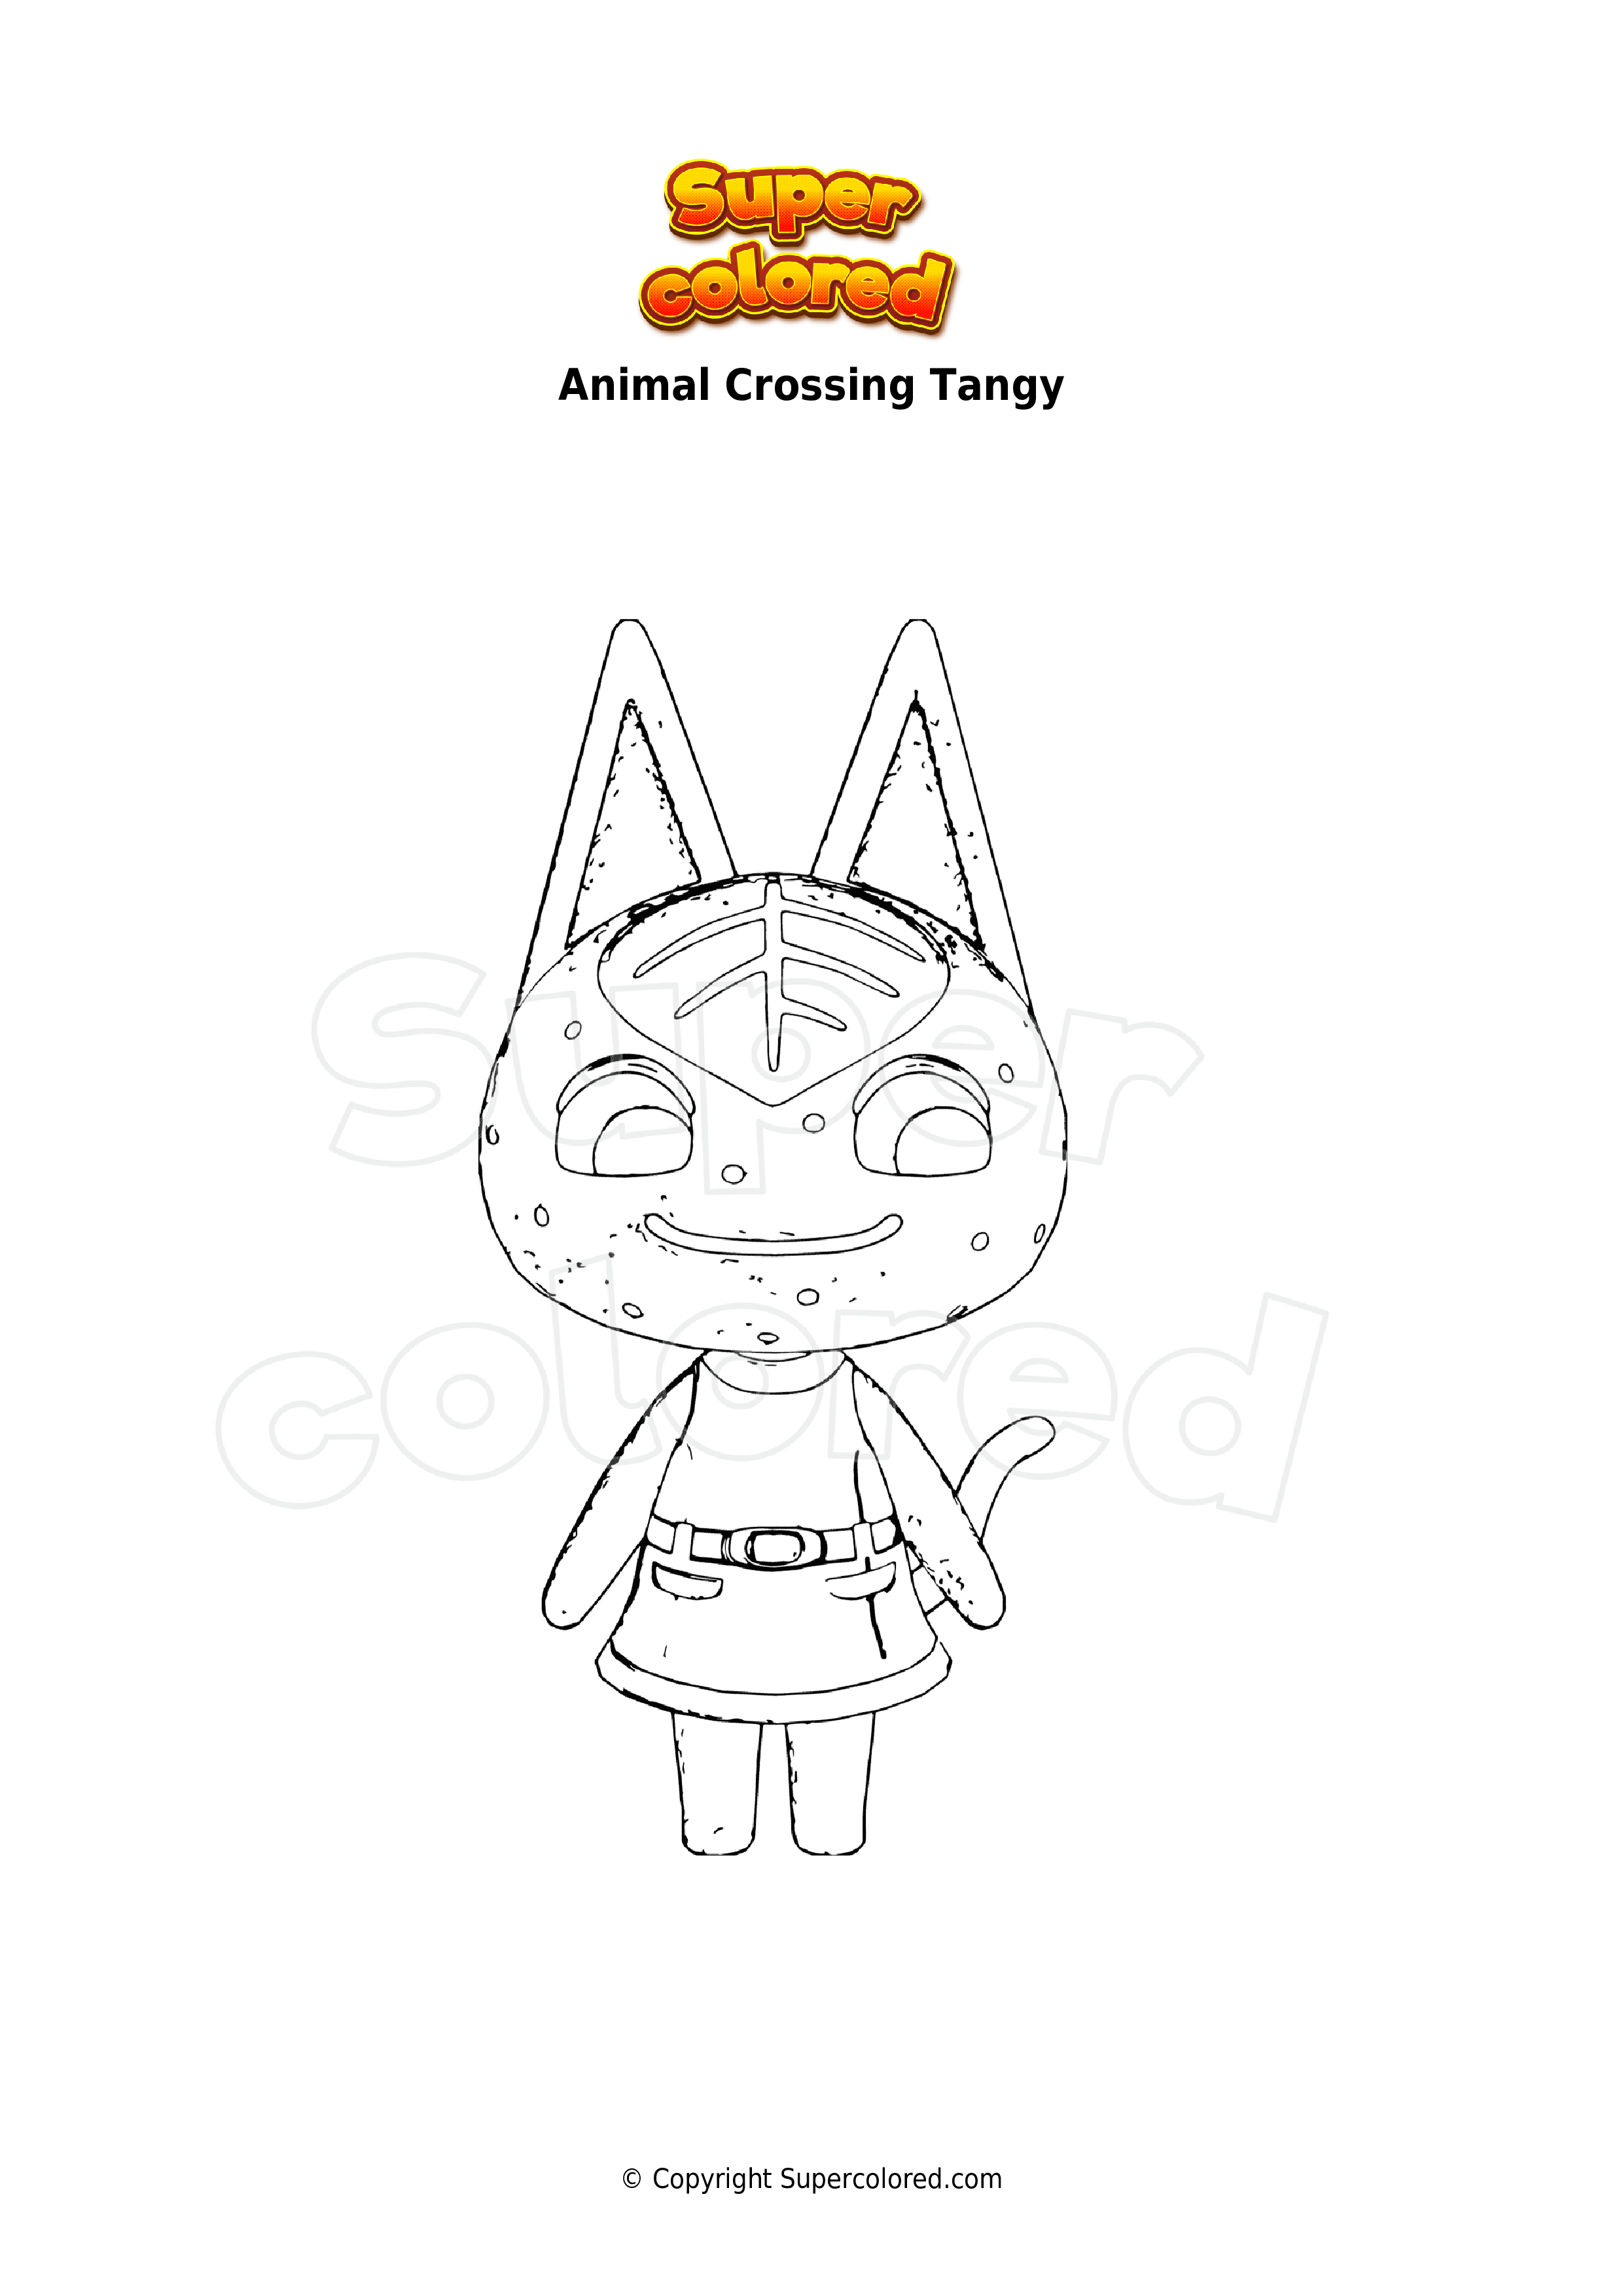 Coloring page Animal Crossing Tangy 